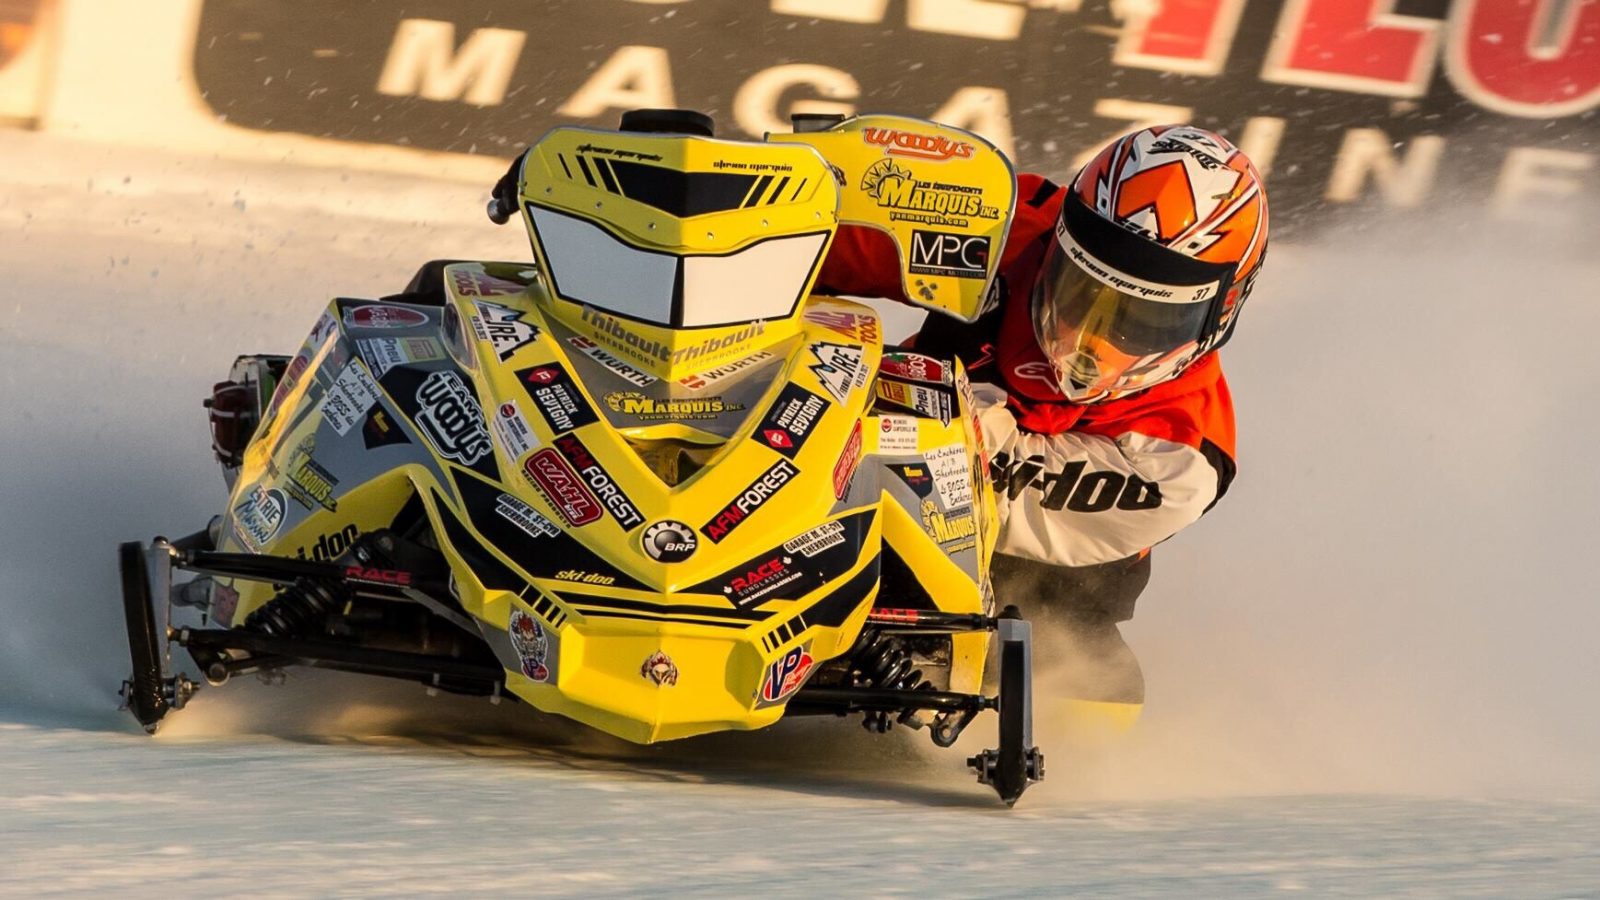 Provincial Snowmobile Championship  comes to Sherbrooke